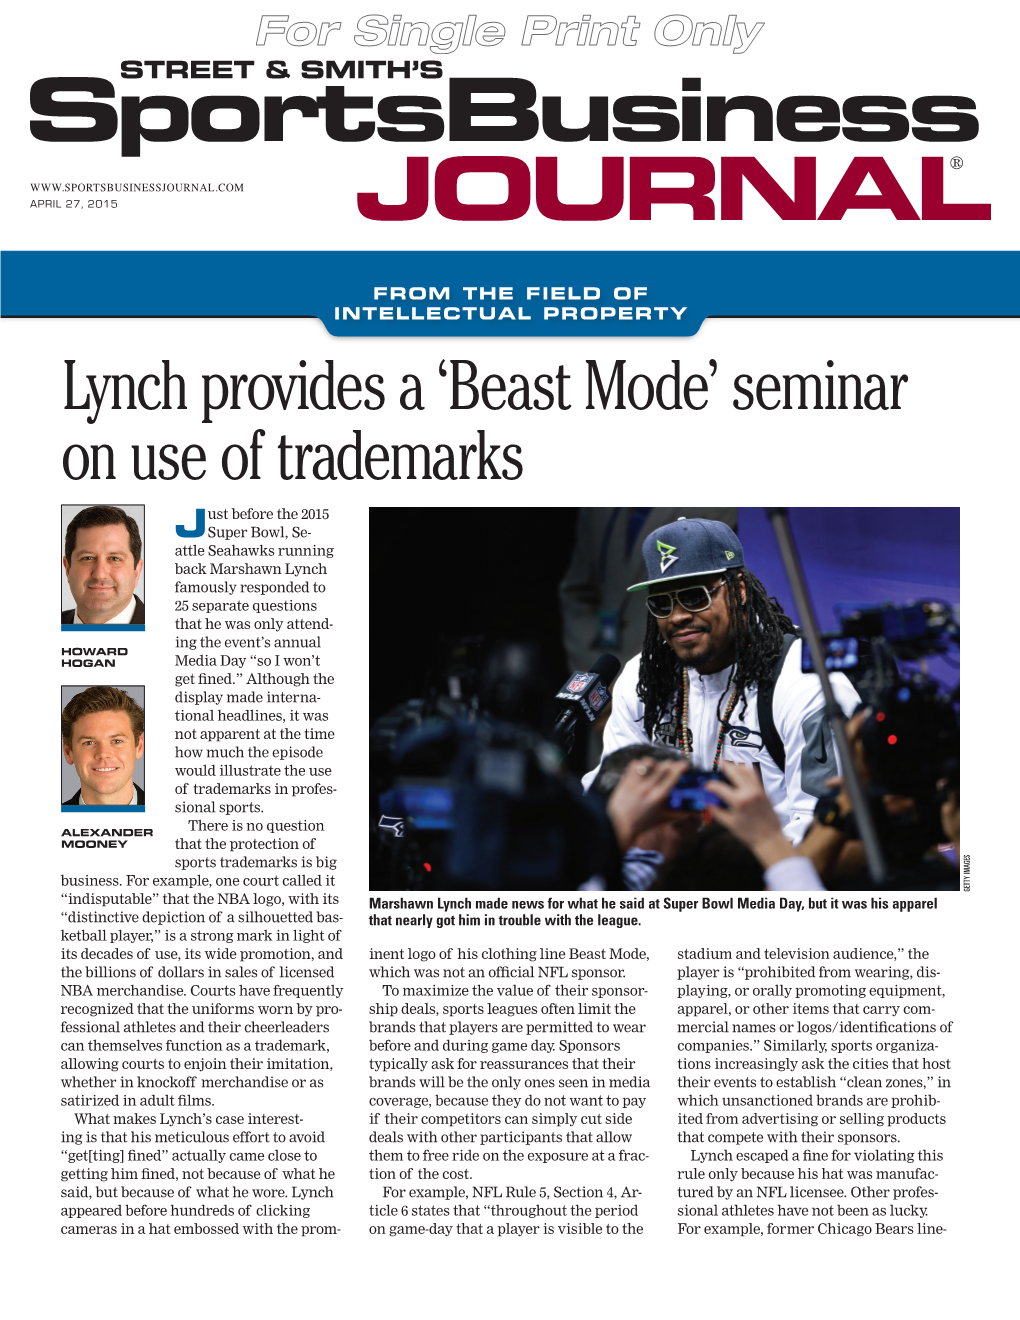 Lynch Provides a 'Beast Mode' Seminar on Use of Trademarks